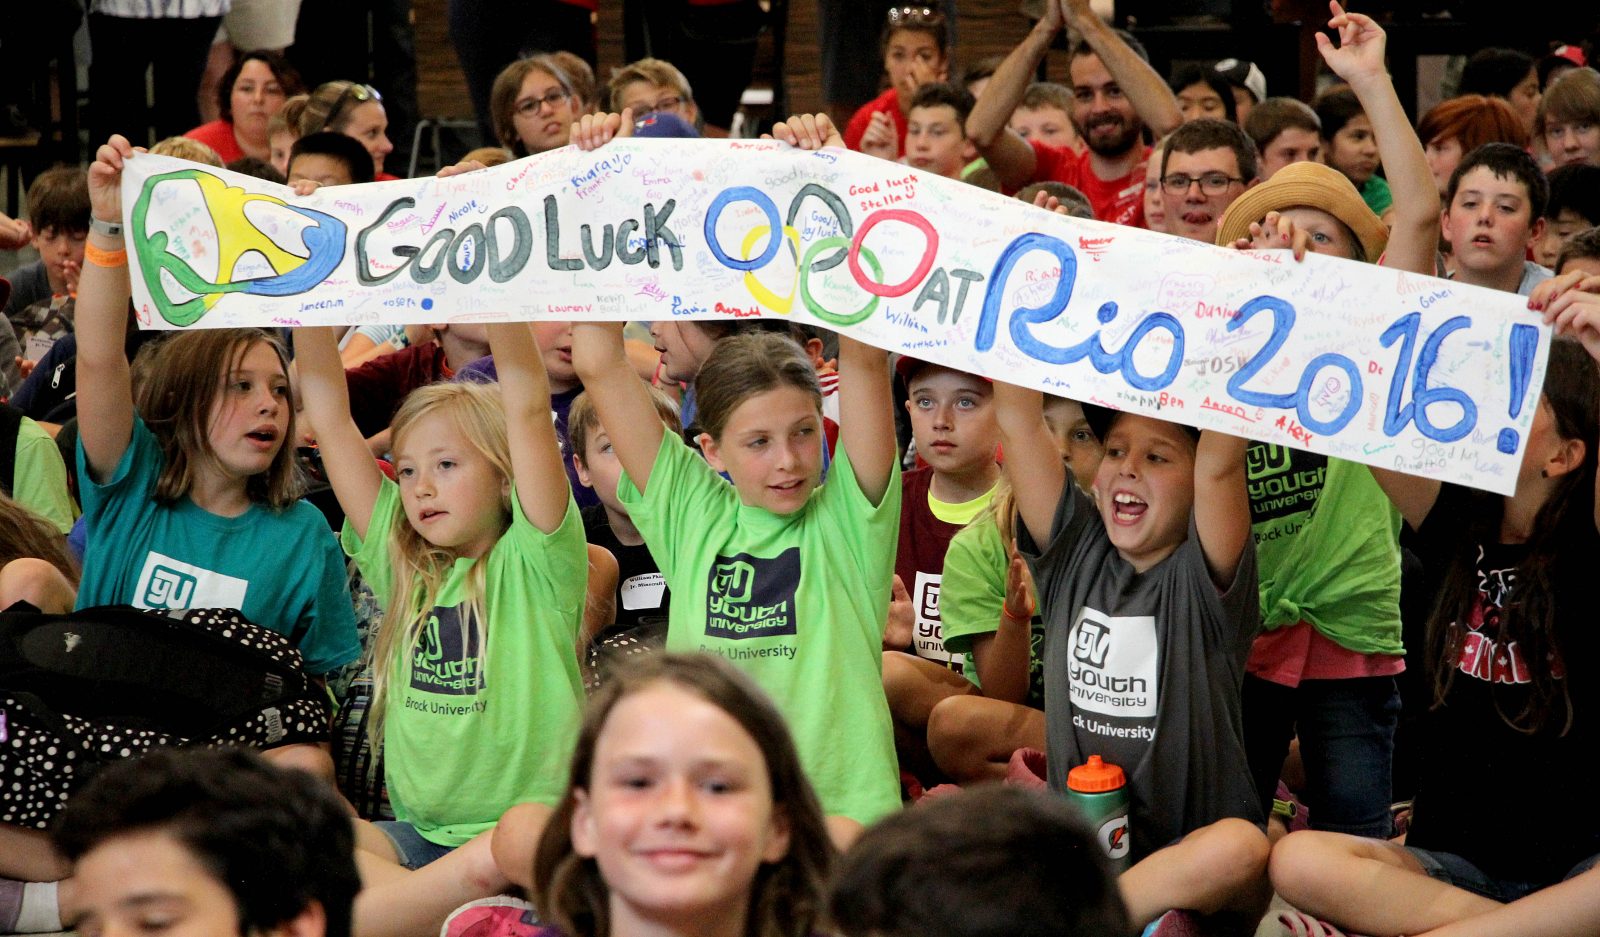 Hundreds of Youth University participants, sports campers, staff and faculty gathered for Olympic send-off party.